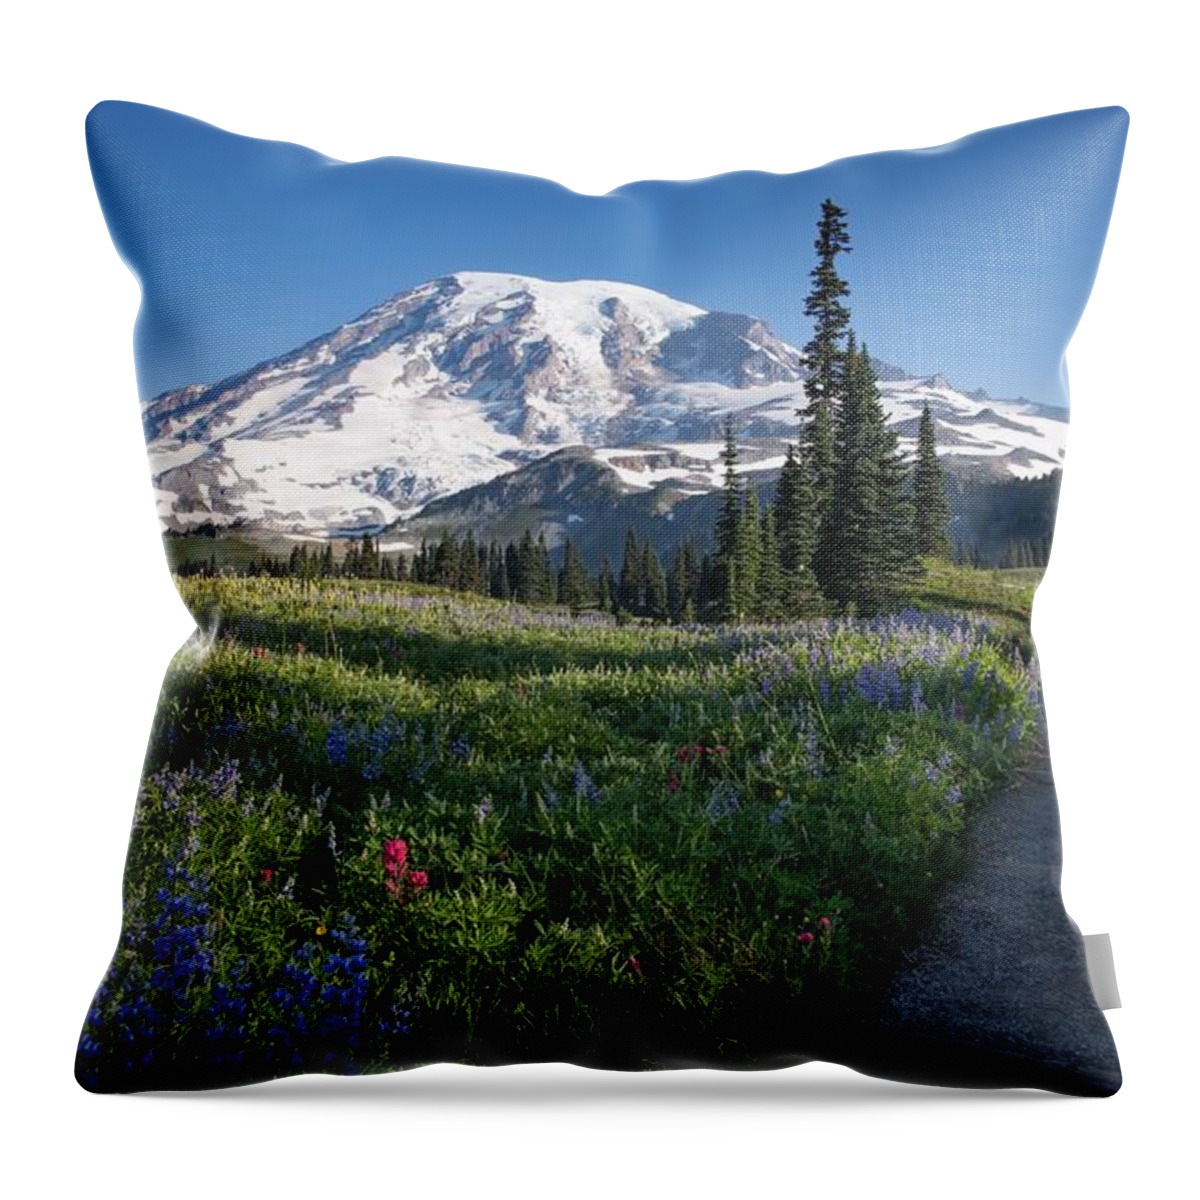 Favorite Time Of Year Throw Pillow featuring the photograph Favorite time of year by Lynn Hopwood